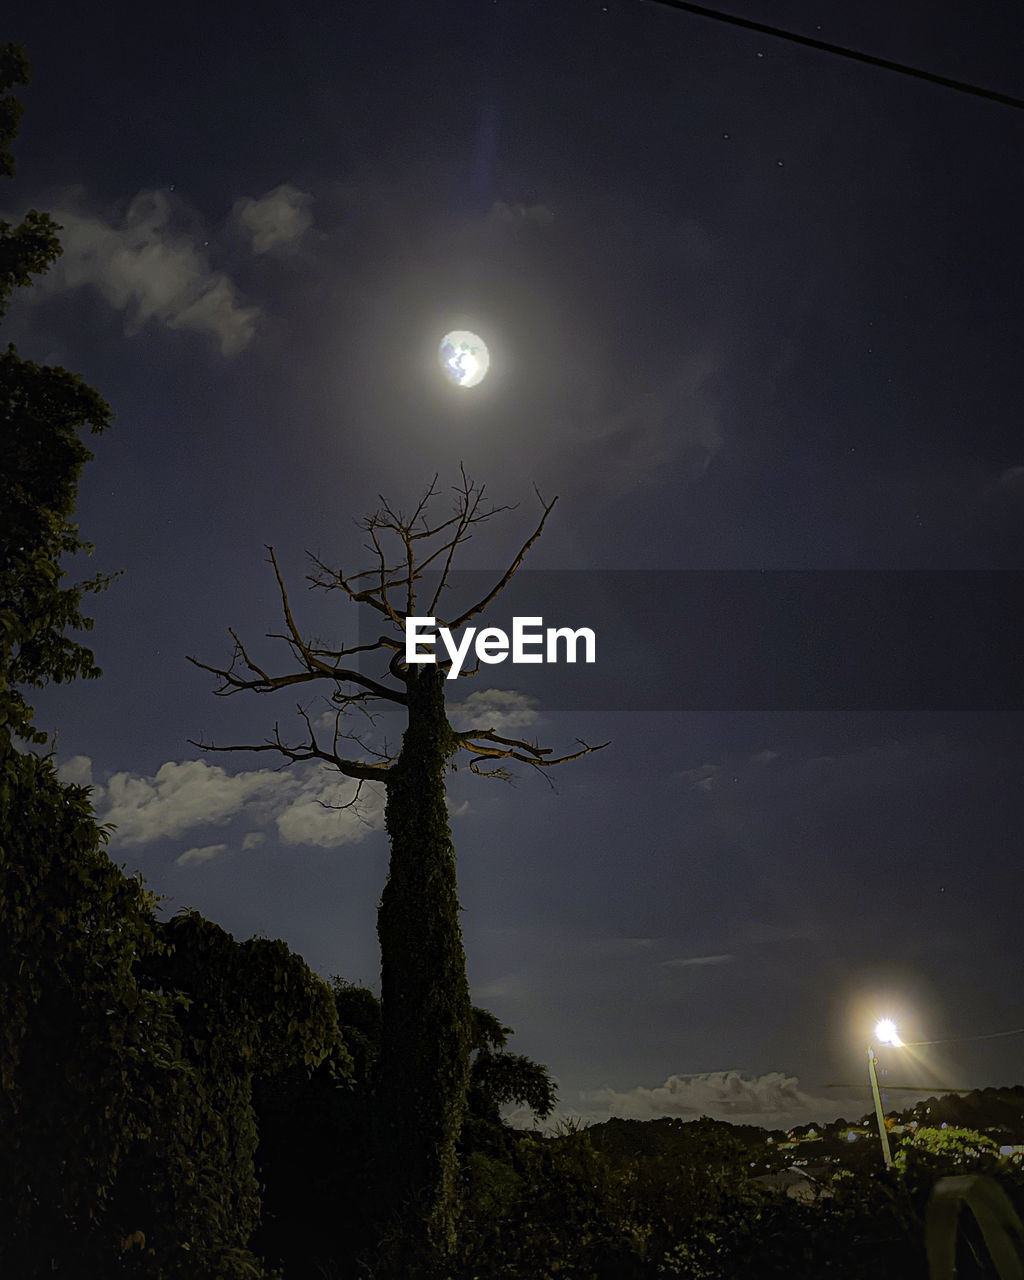 moon, sky, tree, night, moonlight, darkness, full moon, plant, nature, light, cloud, astronomical object, beauty in nature, no people, scenics - nature, illuminated, tranquility, outdoors, evening, silhouette, star, low angle view, tranquil scene, astronomy, land, dark, environment, dusk, tree trunk